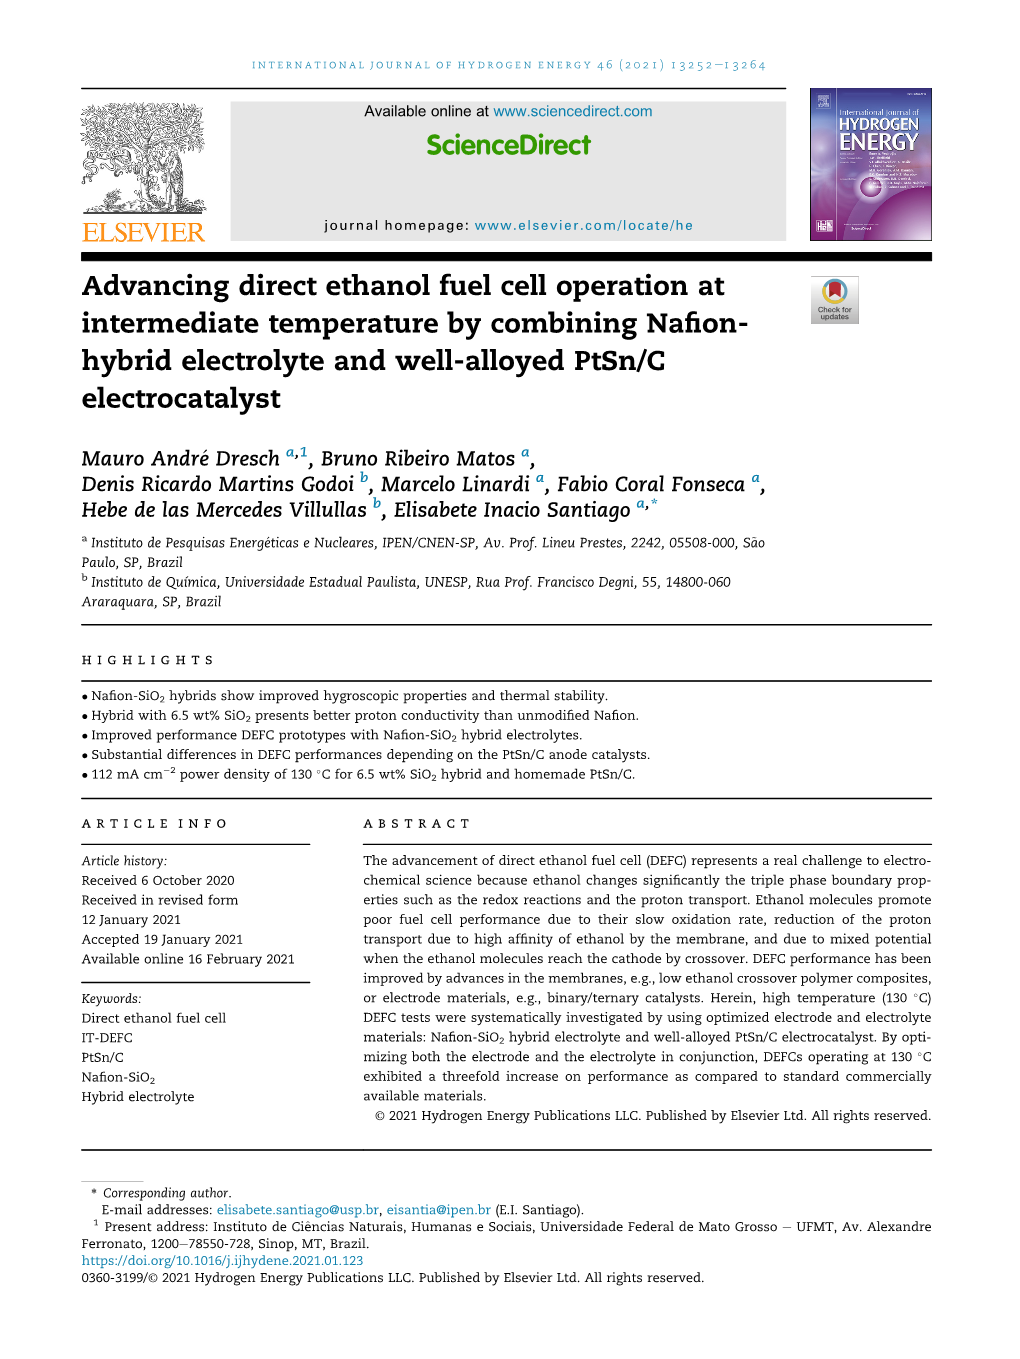 Advancing Direct Ethanol Fuel Cell Operation at Intermediate Temperature by Combining Naﬁon- Hybrid Electrolyte and Well-Alloyed Ptsn/C Electrocatalyst